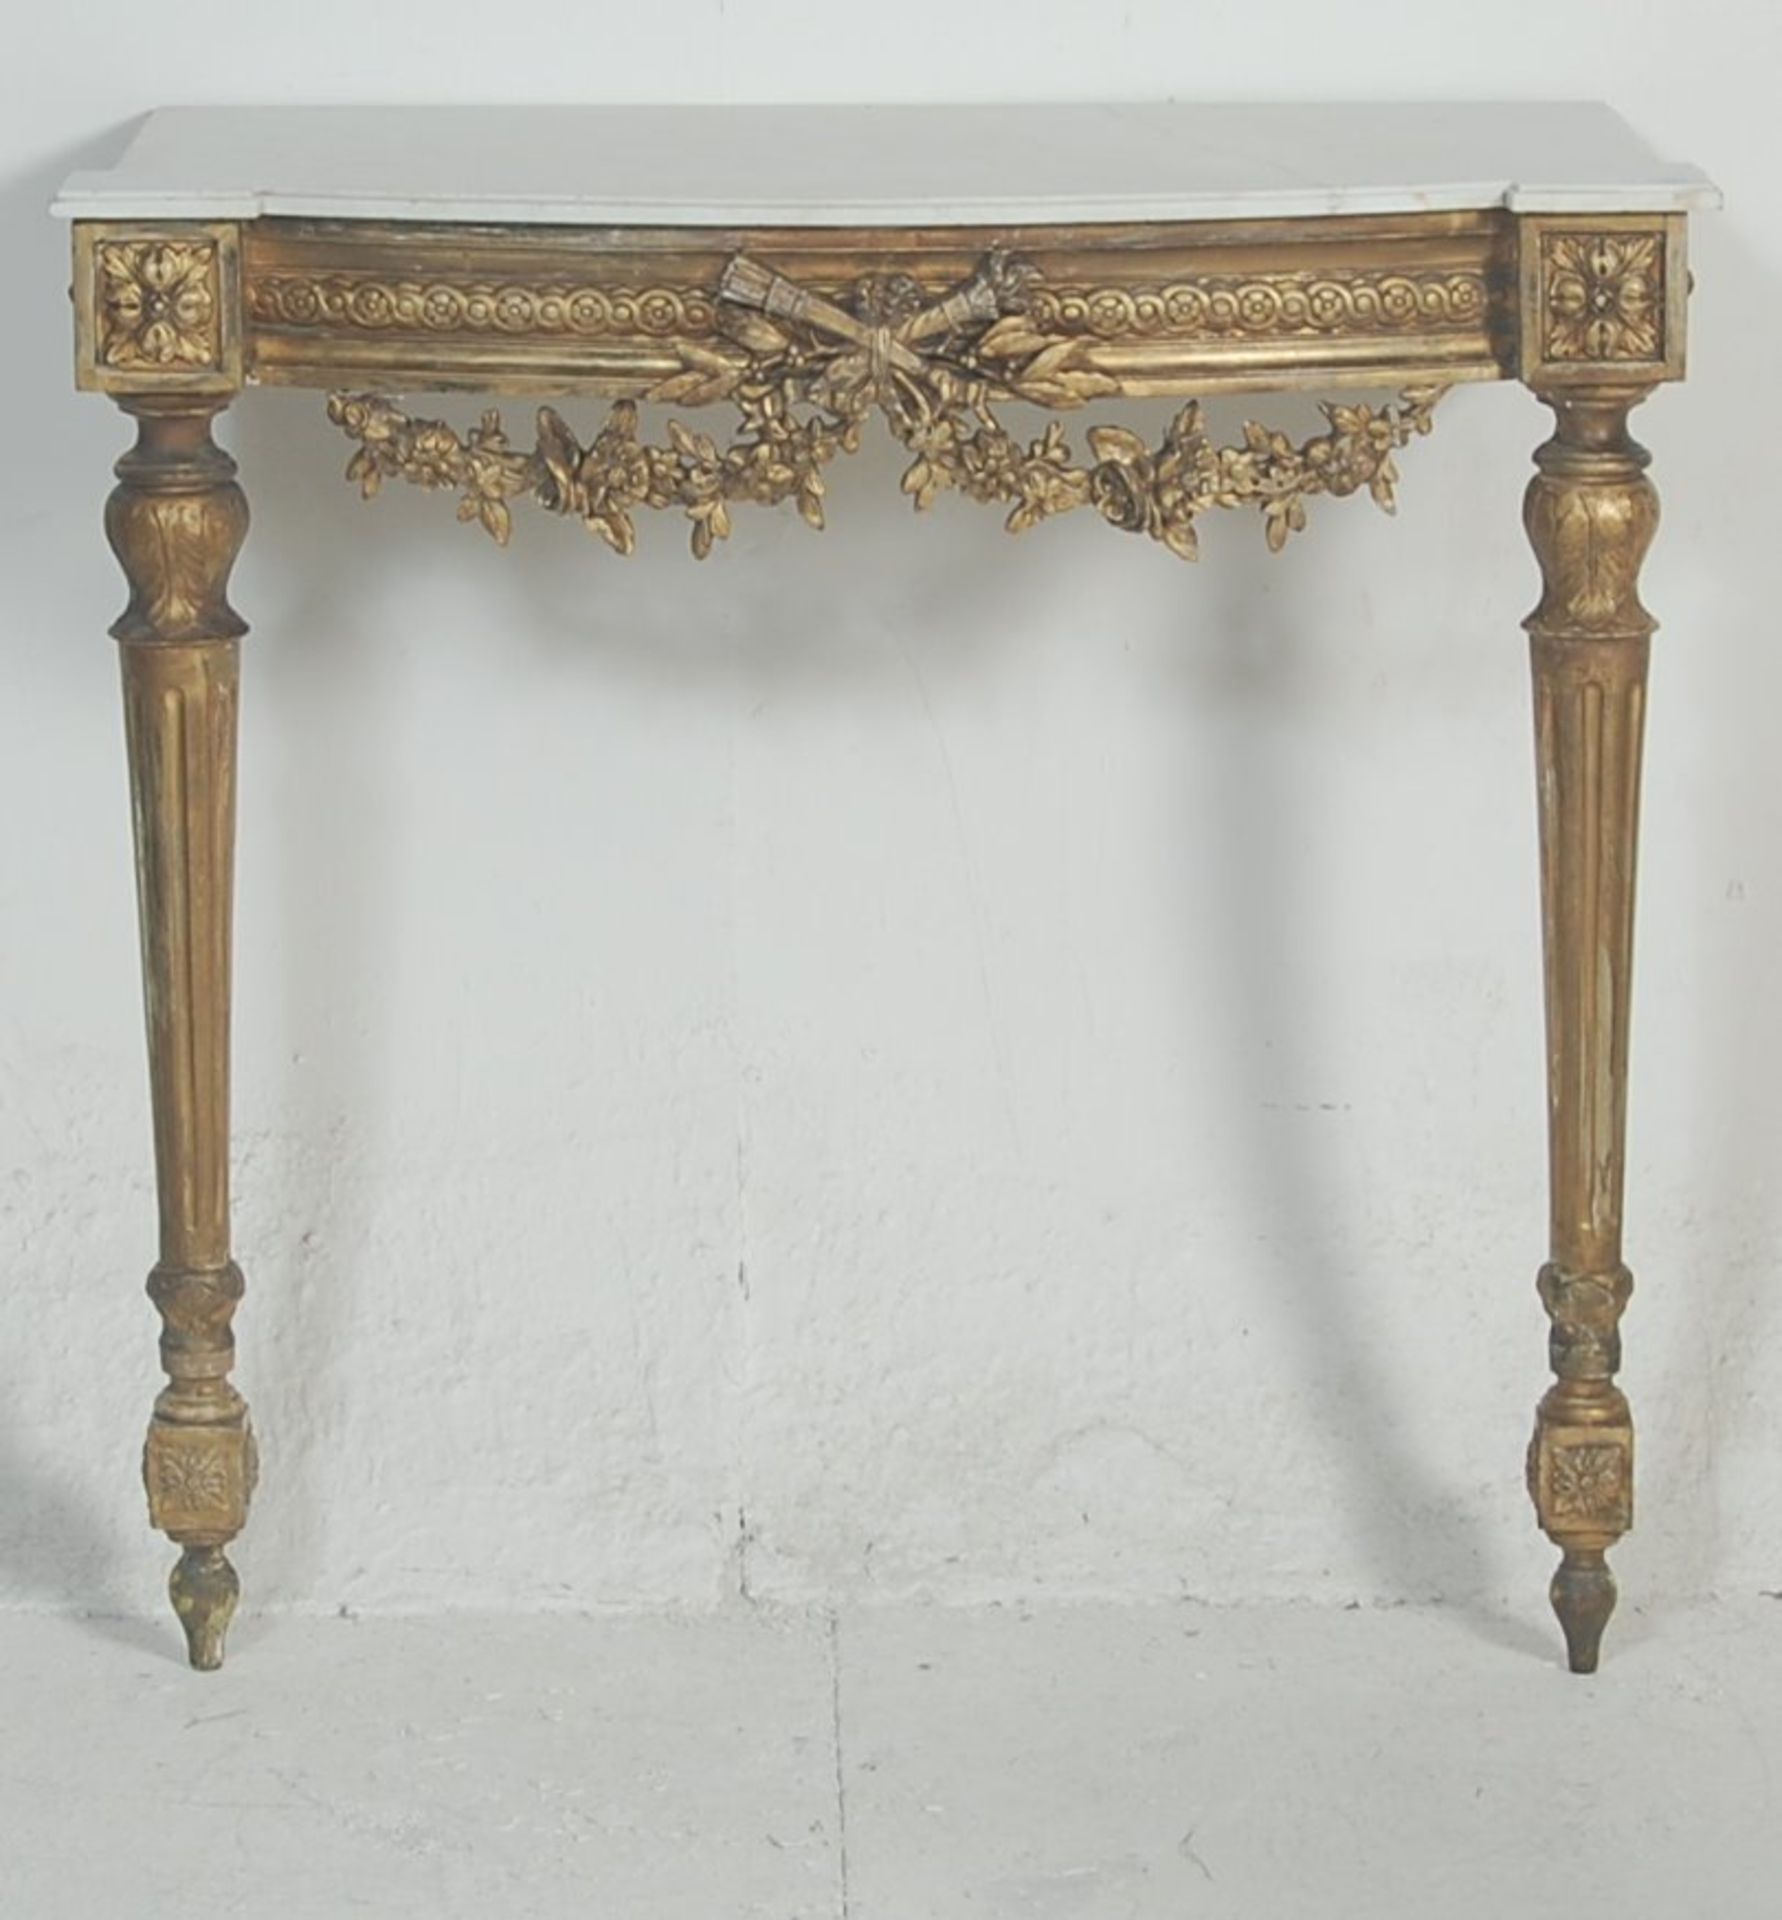 A 19th century French rococo marble and gilt wood console table. The hall / side table being